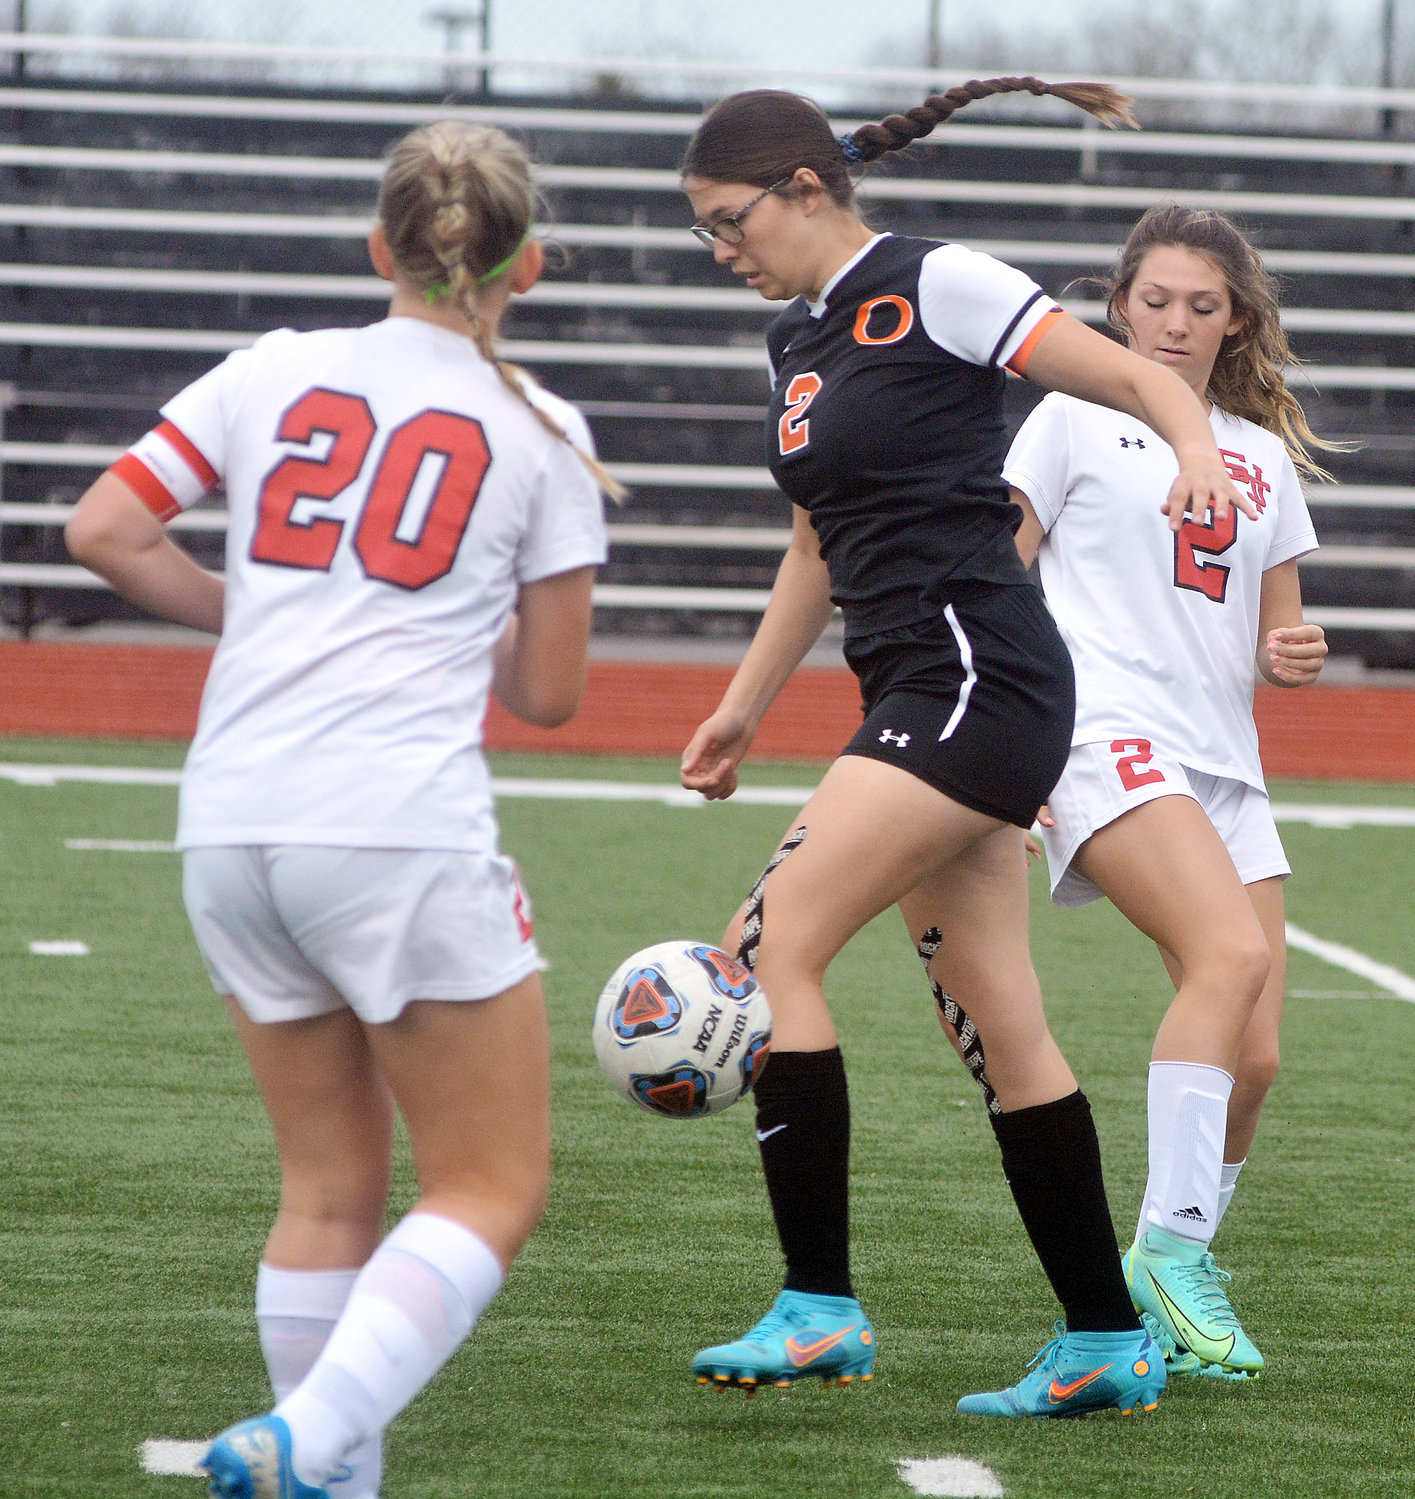 Leah Reed (center) guides the soccer ball through a pair of St. James players.